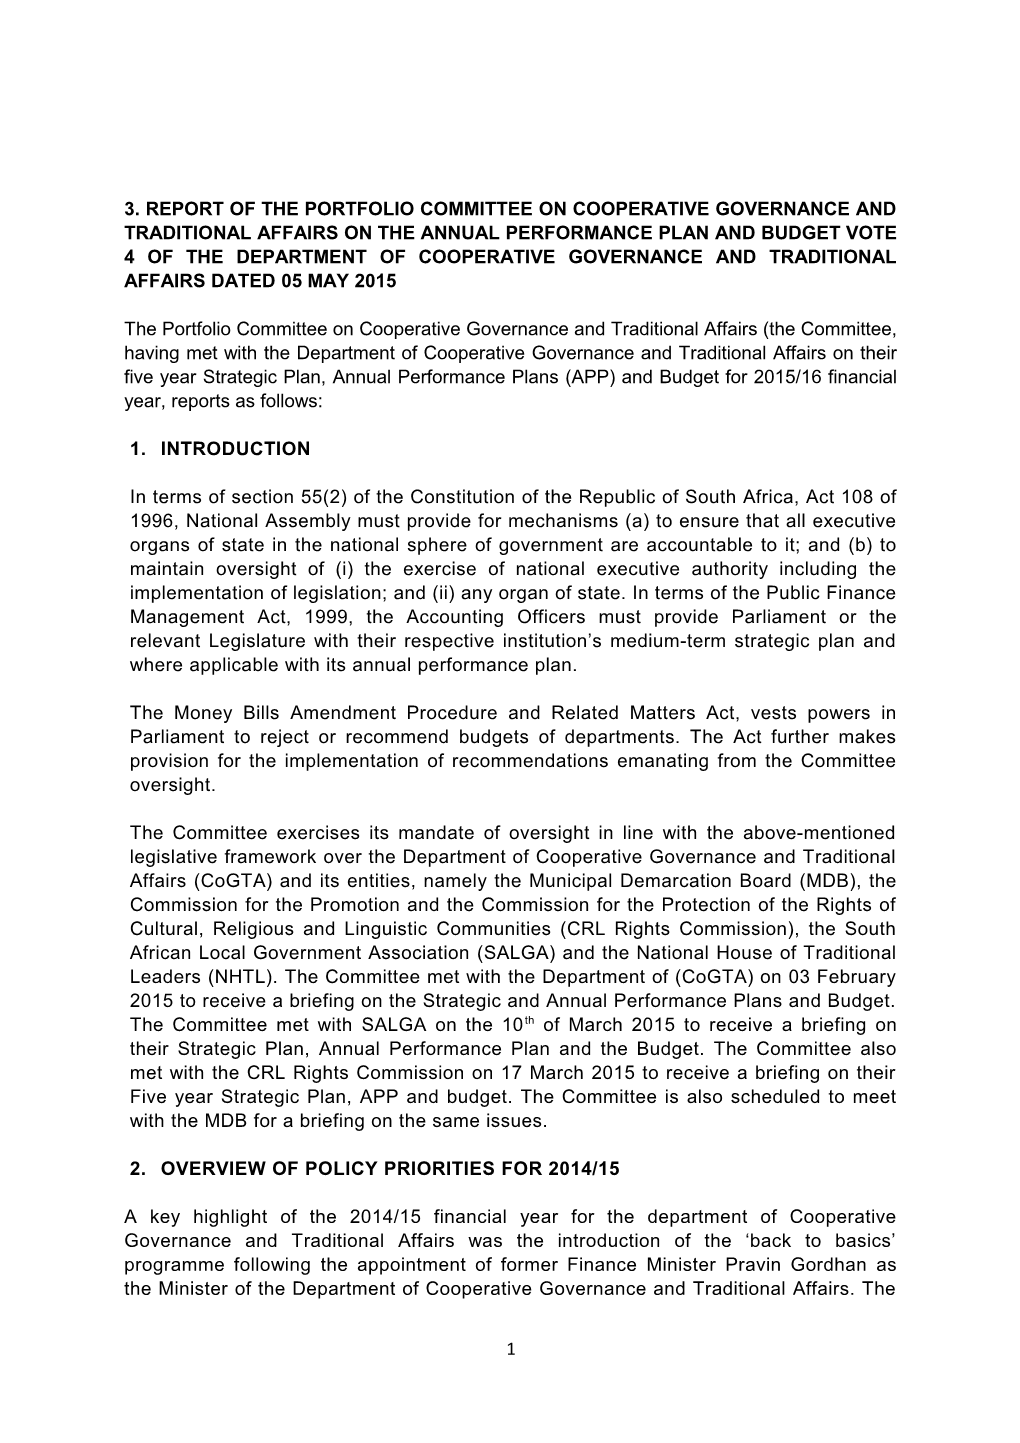 3. Report of the Portfolio Committee on Cooperative Governance and Traditional Affairs